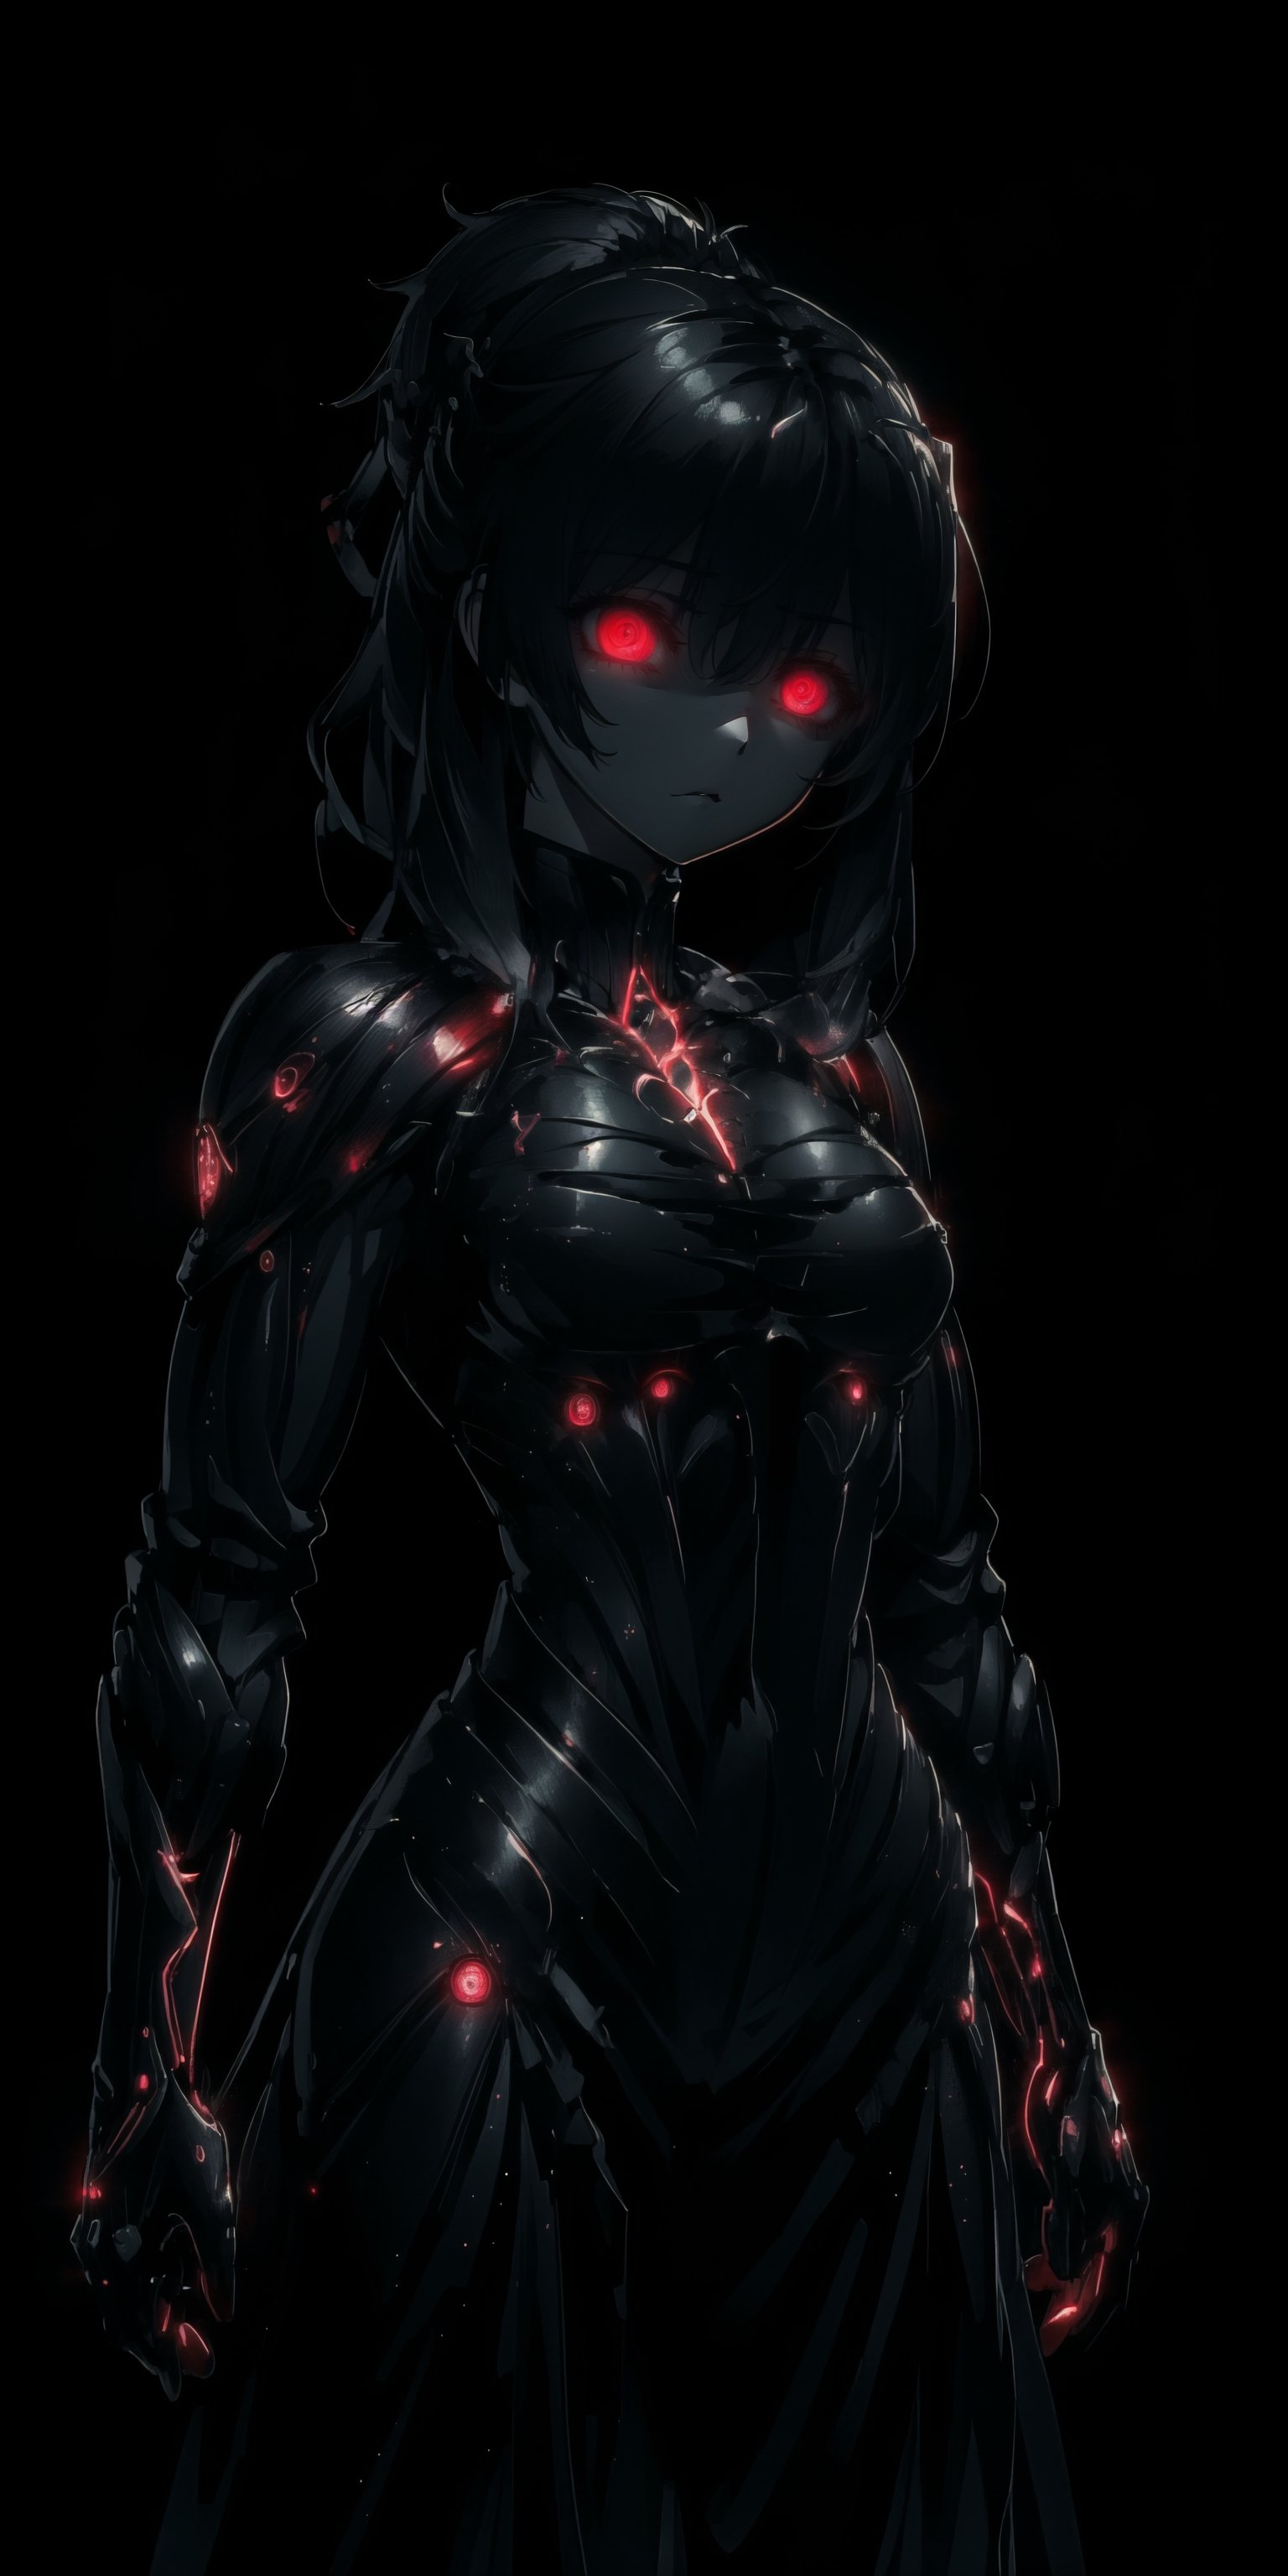 BEST QUALITY, HIGHRES, ABSURDRES, HIGH_RESOLUTION, MASTERPIECE, SUPER DETAIL, HYPER DETAIL, INTRICATE_DETAILS, LIGNE_CLAIRE, PERFECTEYES, DARK EYELASHES, EYELINER, SOFT GLOWING EYES,

mature_female, tight_clothes, (slicked_back_hair:1.4),
simple_background, glow_in_the_dark, glowing, glowingveins, (glowing eyes:1.4), super dark theme, dark_background, no lighting, shaded face, (red_eye:1.4), laser, led